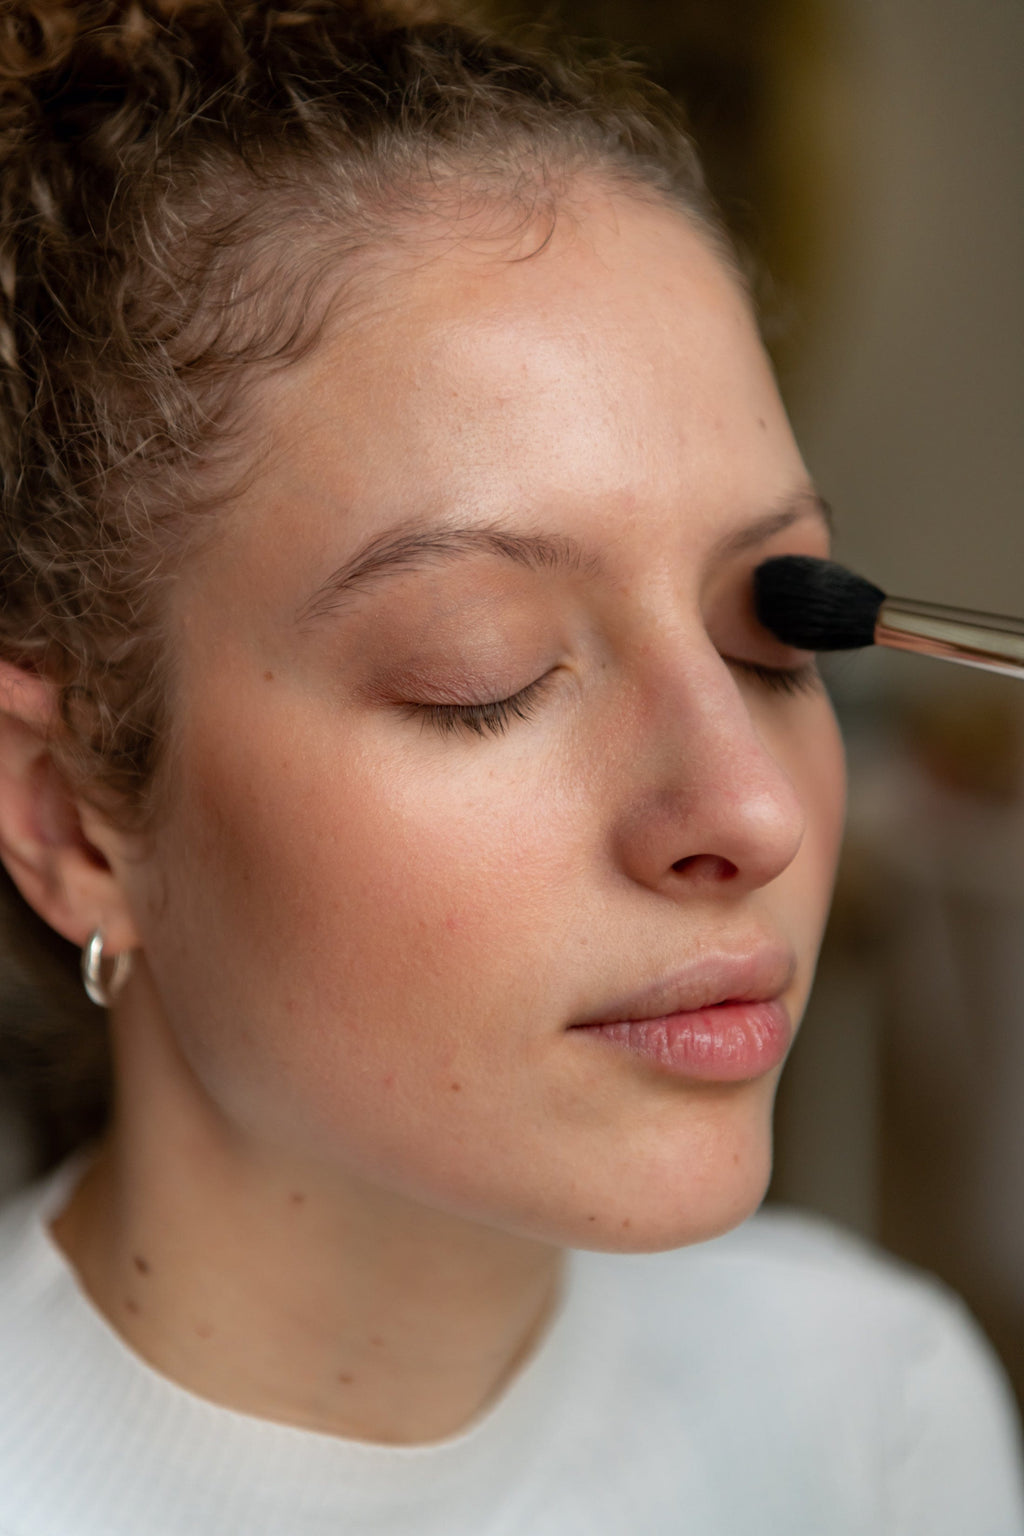 Ladiesparty @ your place: haar en make-up (7-9 personen) - The Natural Beauty Club